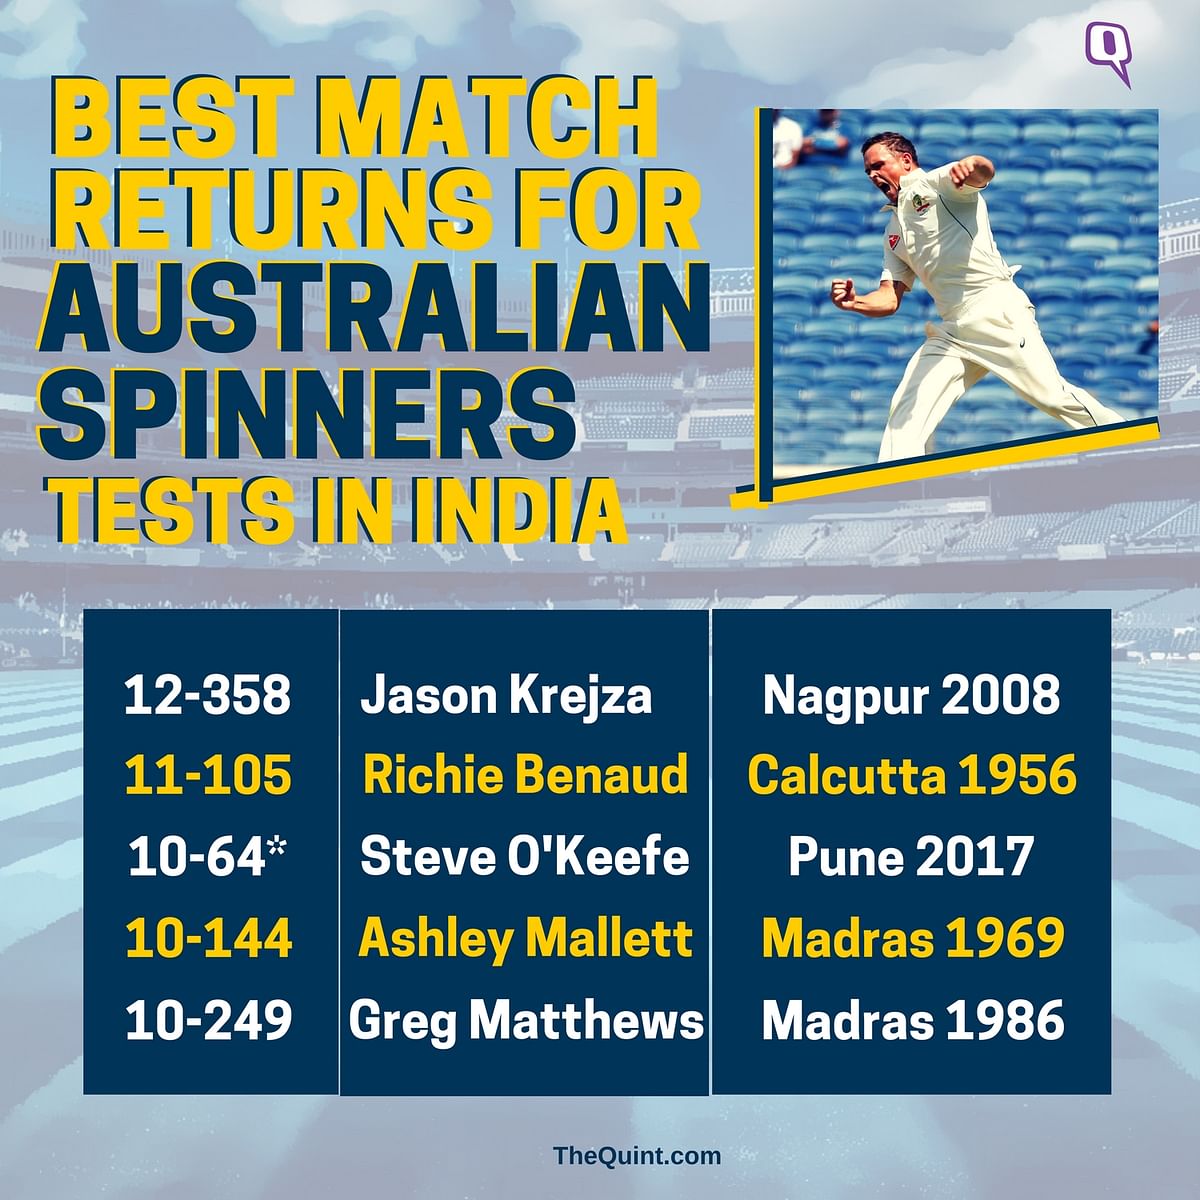 Steve O’Keefe alone matched Ashwin and Jadeja’s combined haul over both innings.